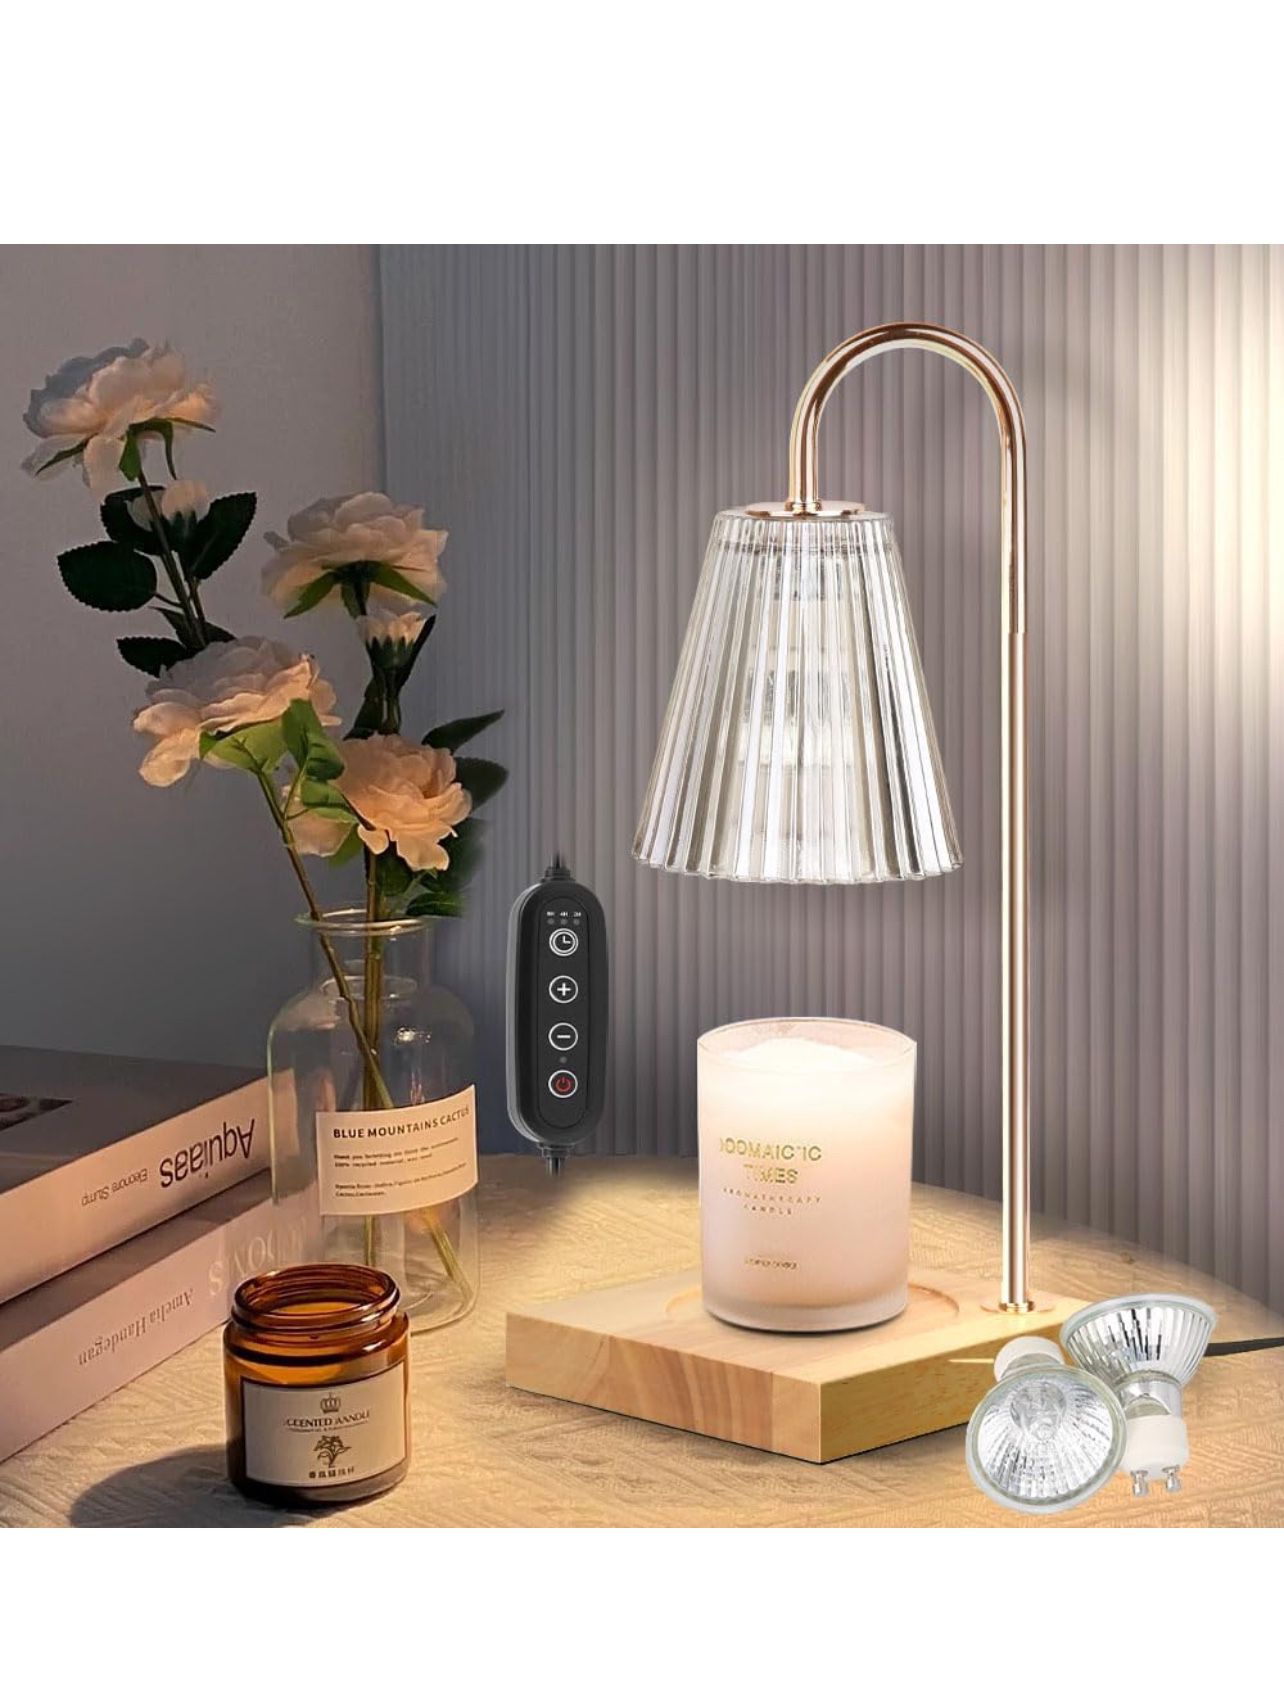 Candle Warmer Lamp-Electric Candle Warmer with Timer, Mothers Day Gifts for Mom,Dimmable Candle Warmers for Jar Candles,Wax Melt Warmer for Bedroom Ho